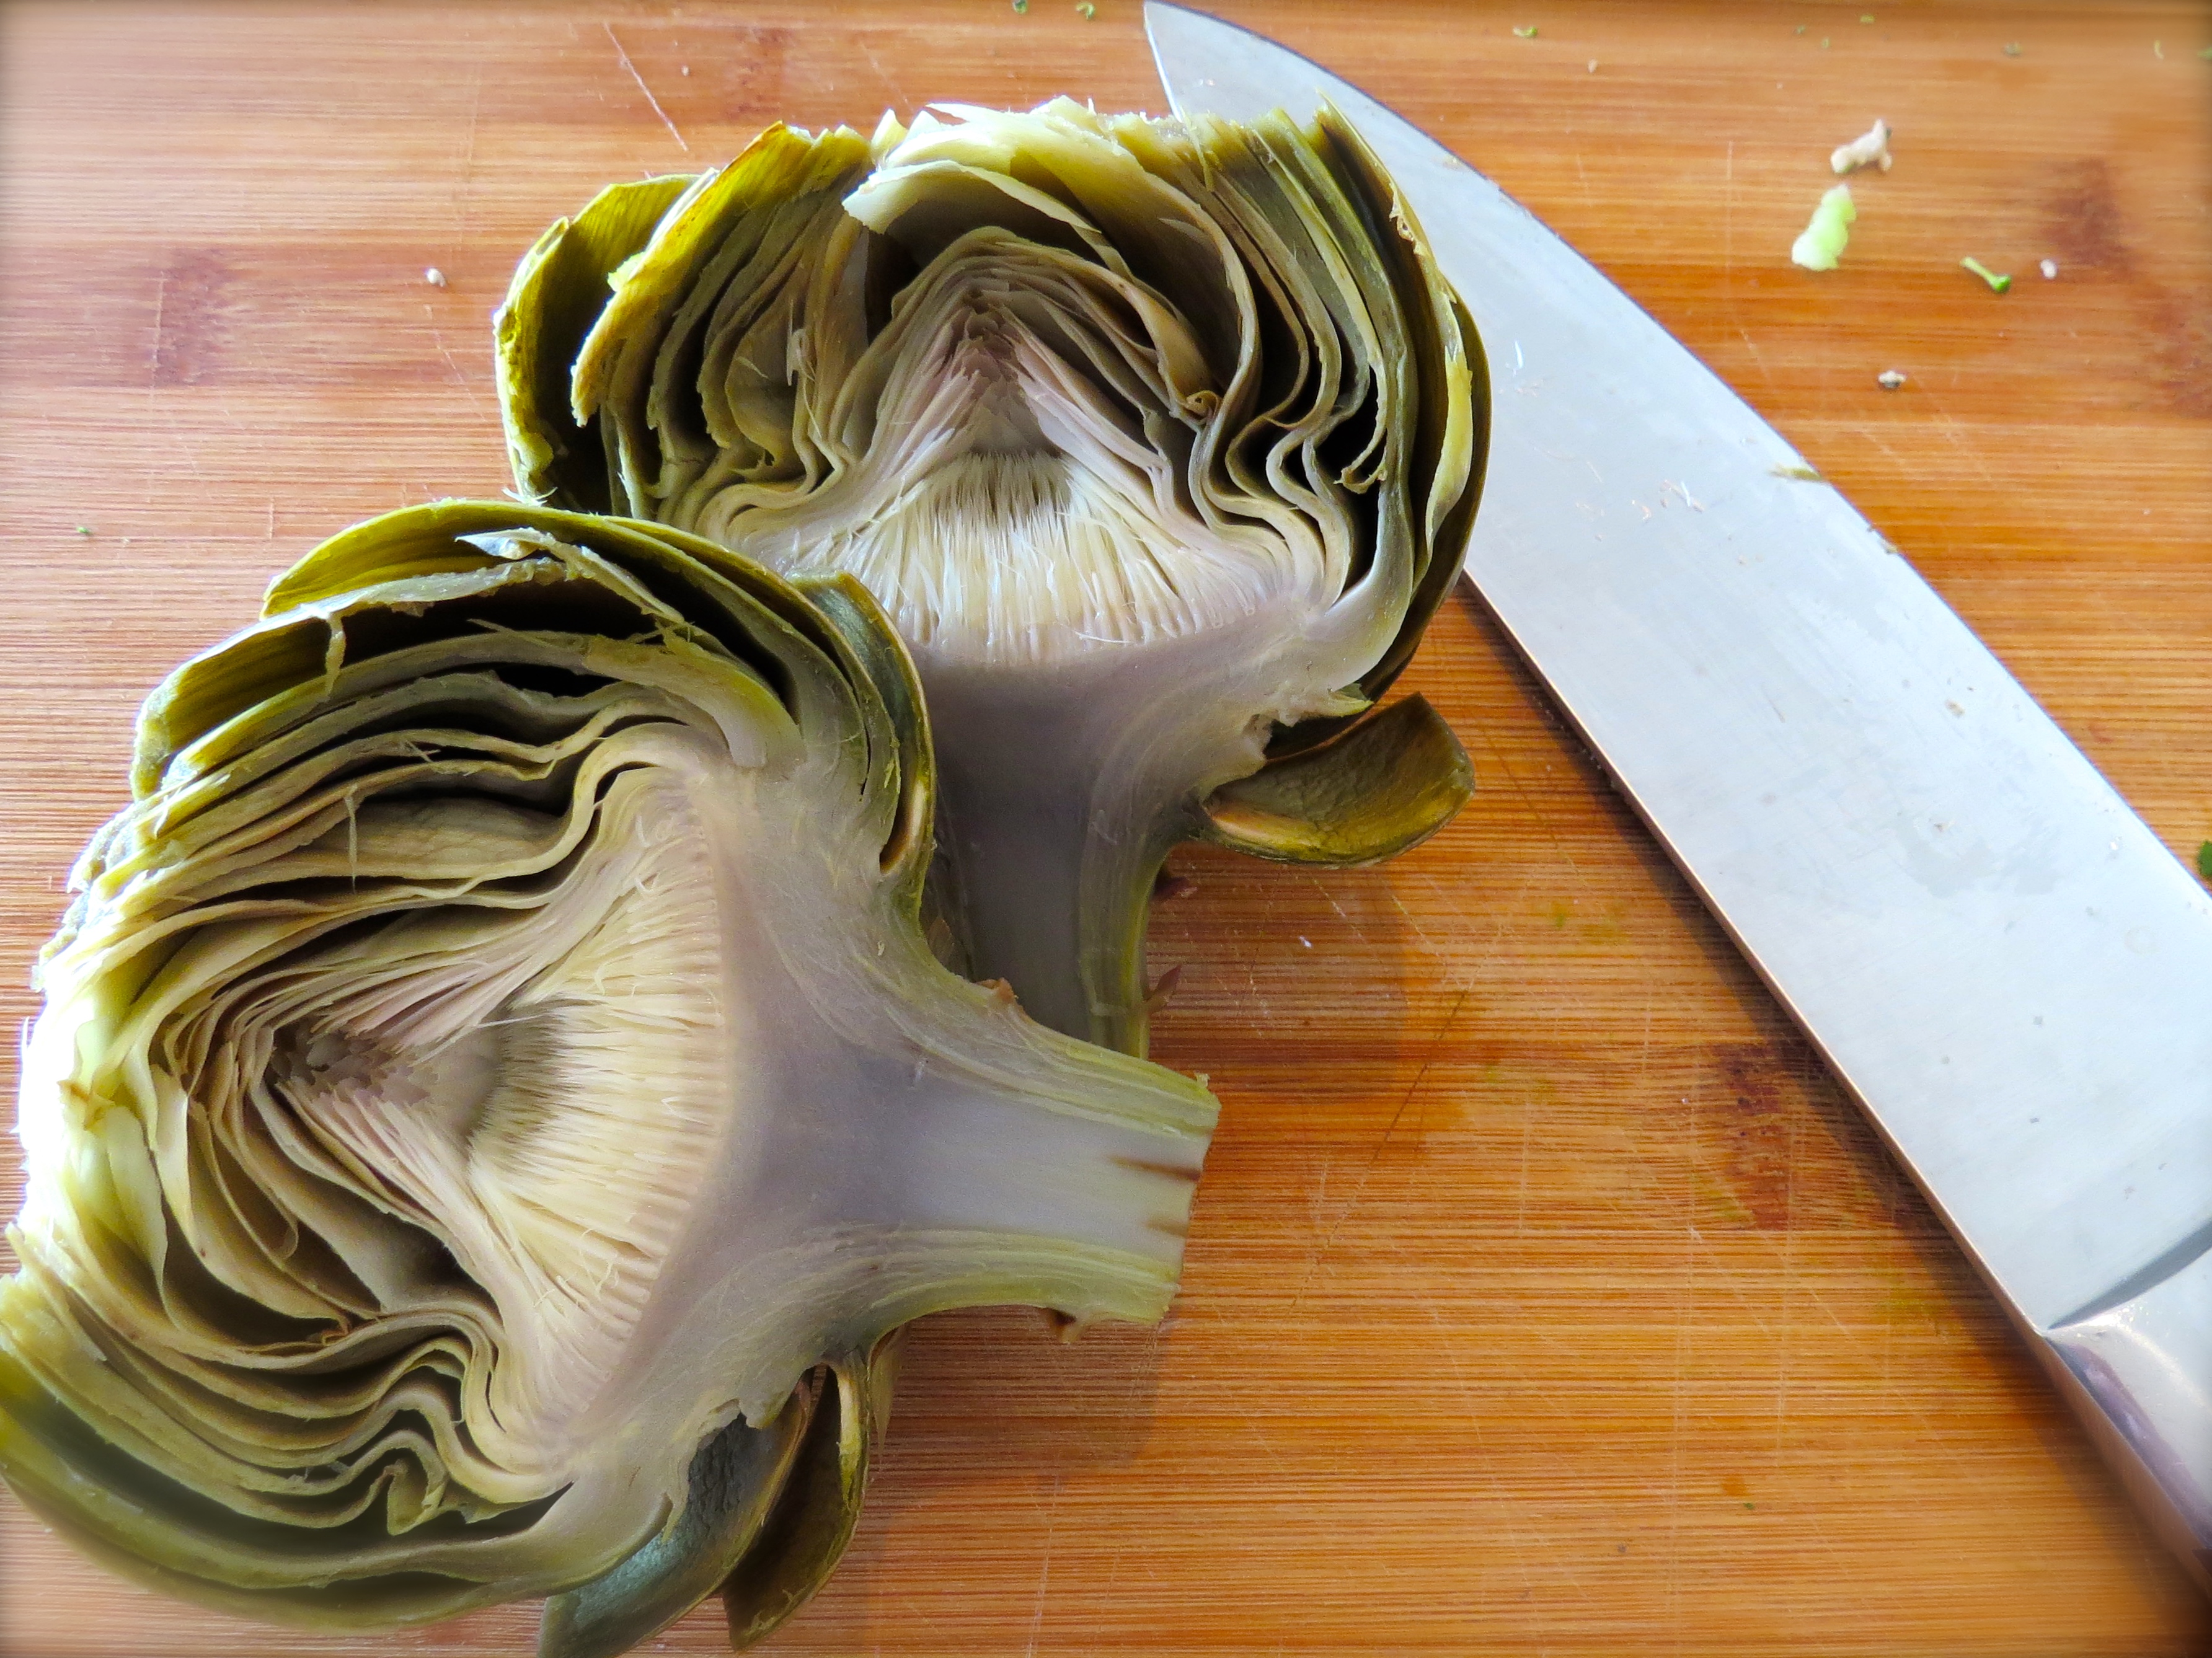 After I sliced the steamed artichoke in two, I needed to scrape out the choke (the fuzzy center.)